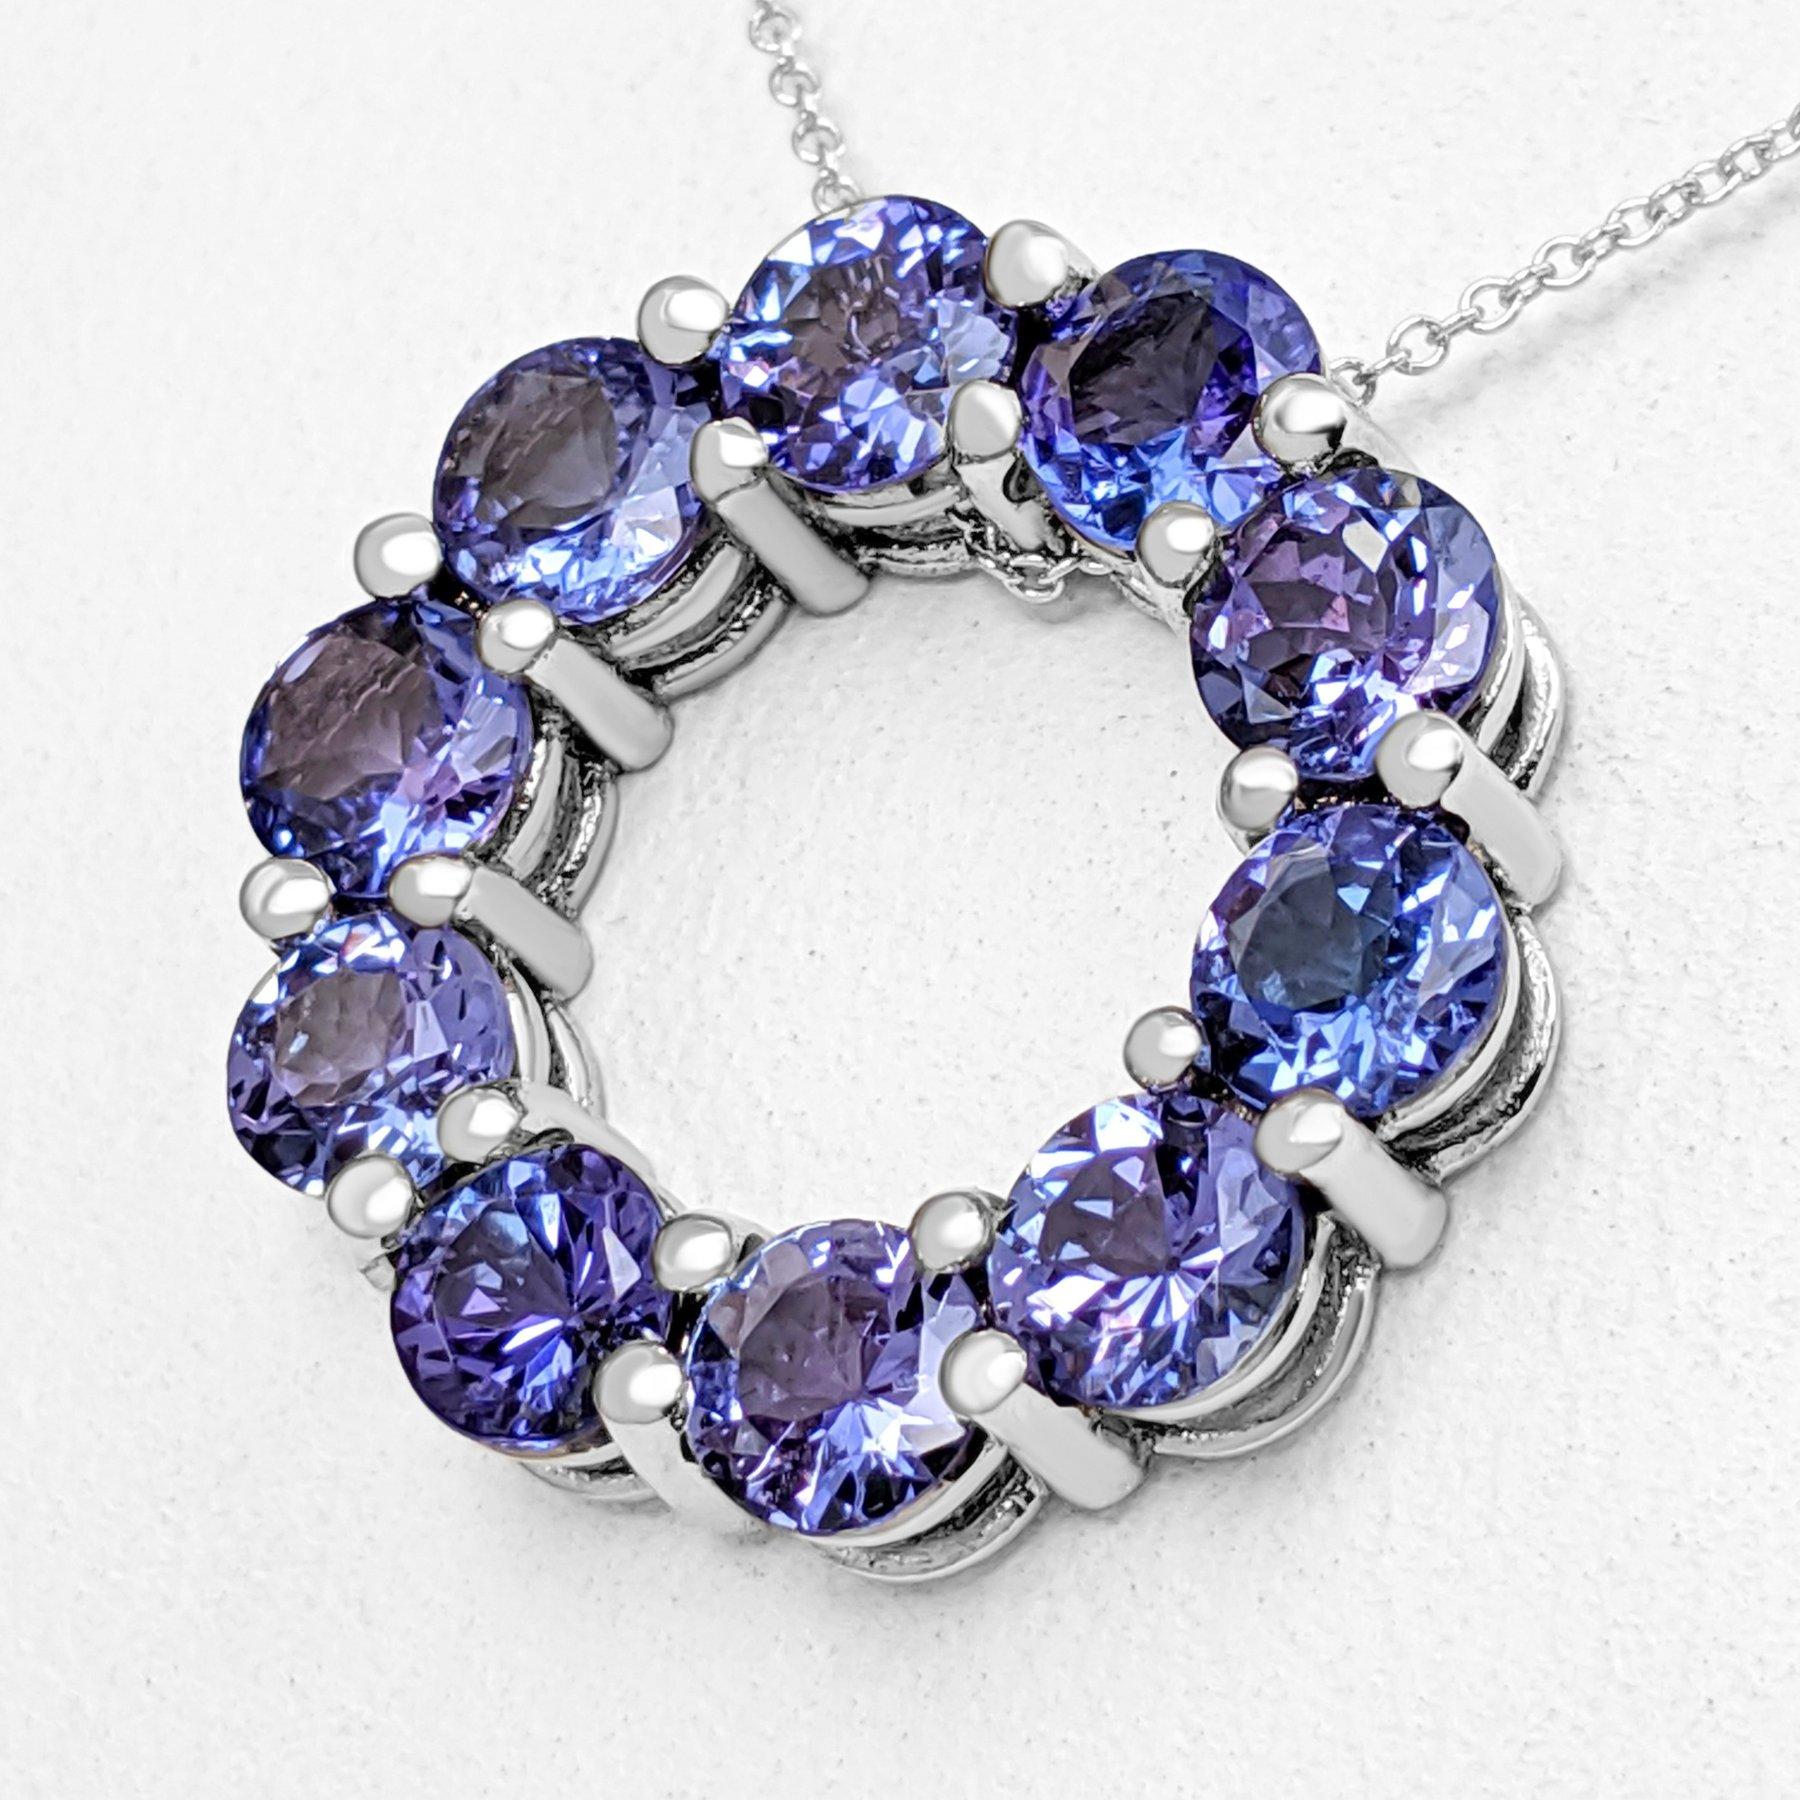 Women's $1 NO RESERVE!   5.23cttw Tanzanite, 14K White Gold Necklace With Pendant